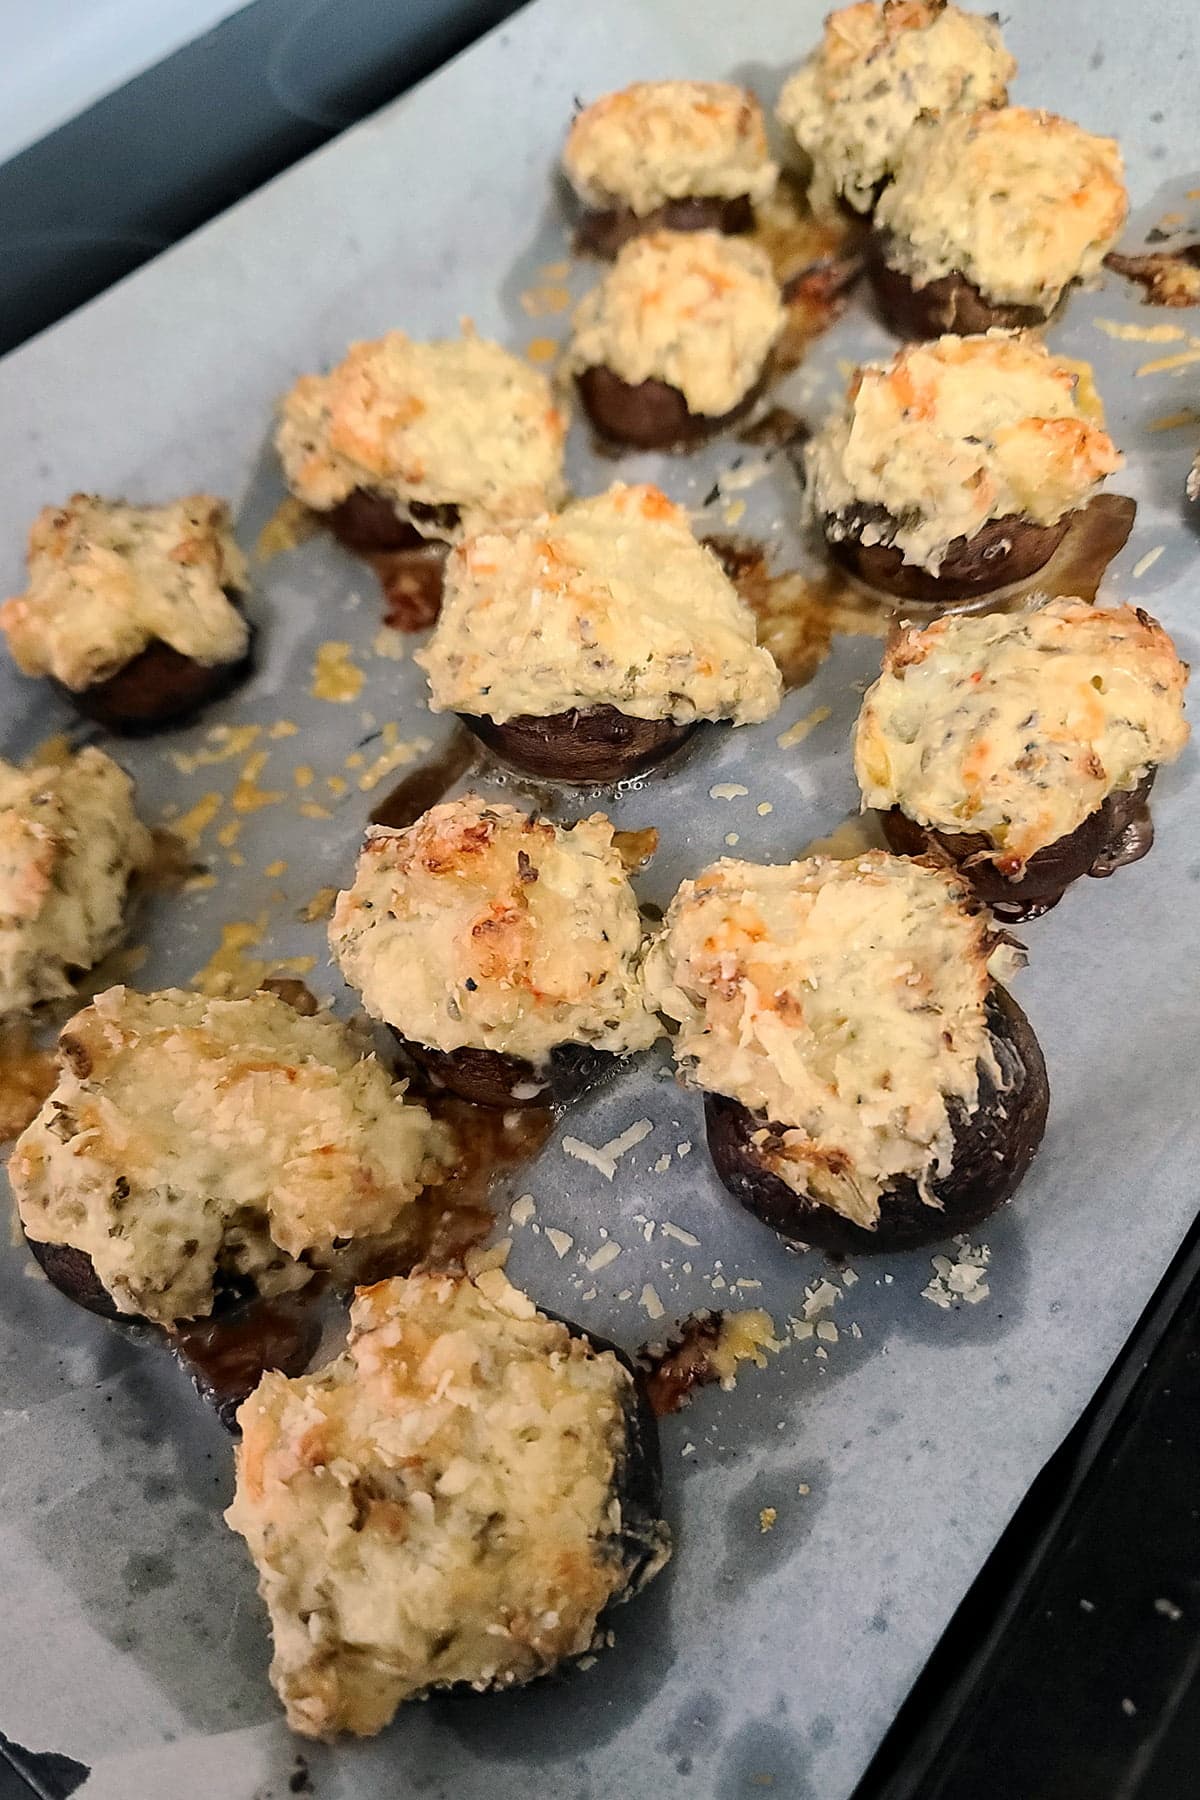 The stuffed mushrooms on the pan, fresh out of the oven.